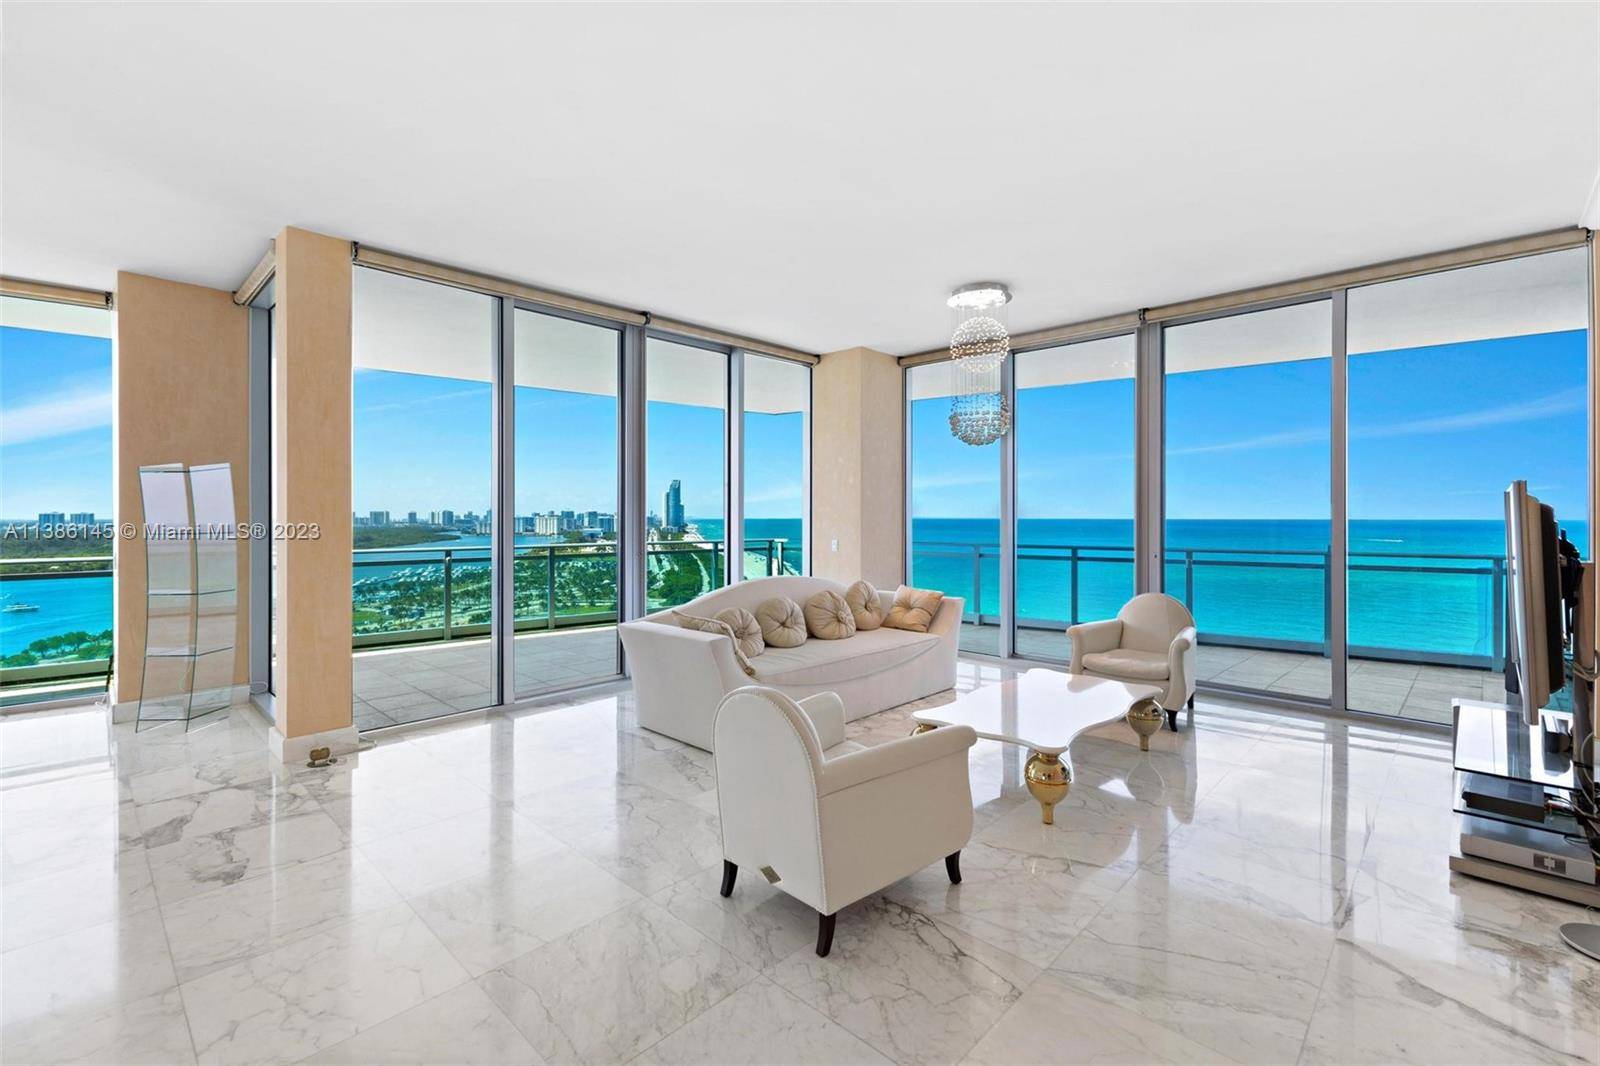 Luxury living awaits you at The Ritz Carlton in the highly sought after Bal Harbour neighborhood.